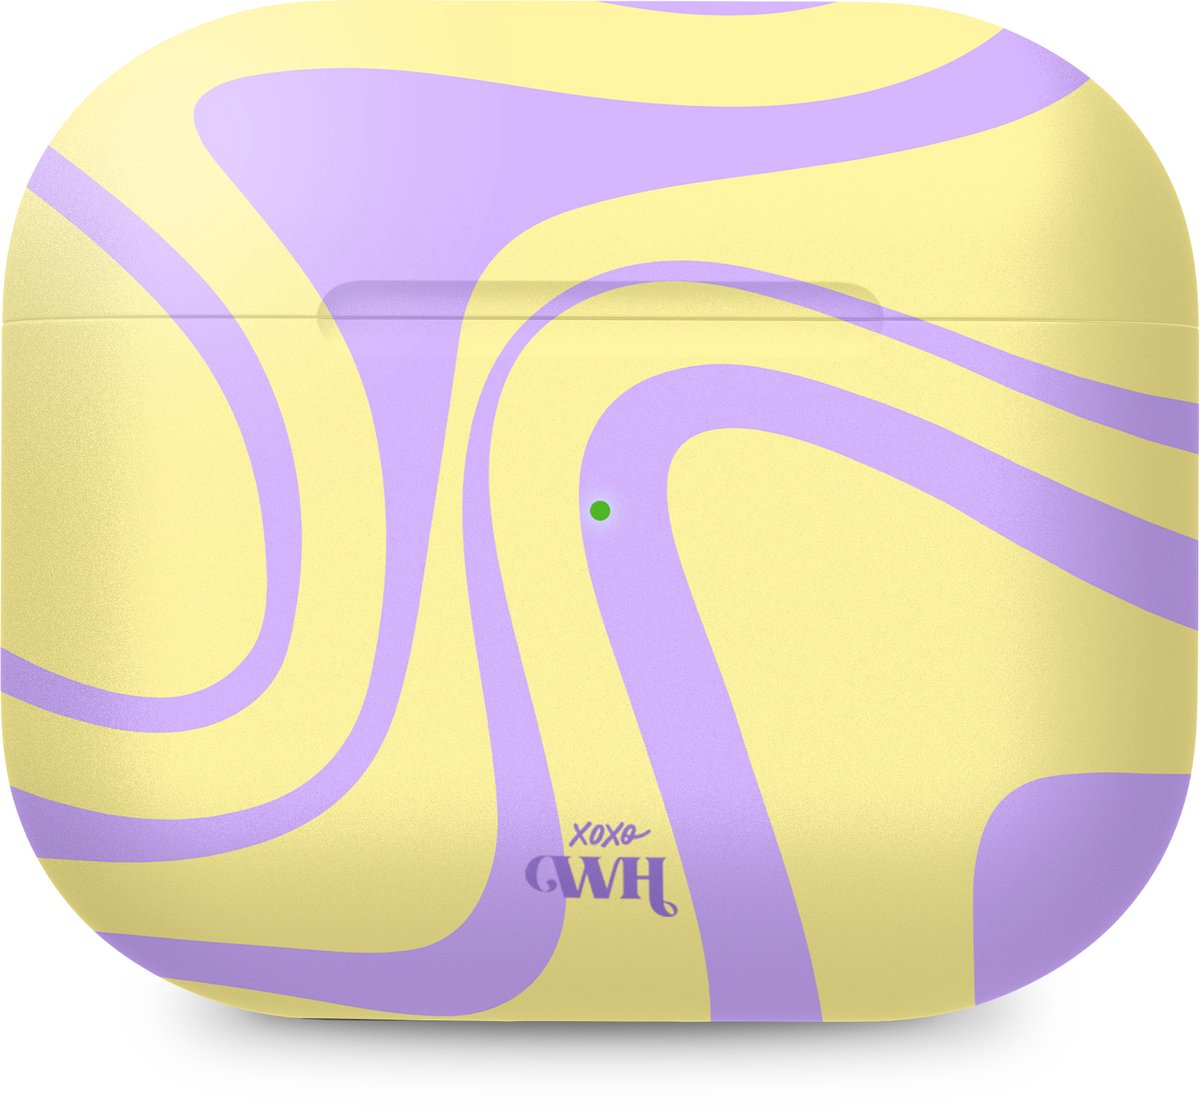 Airpods Pro 1/2 hoesje - Sunny Side Up - Geel - Paars - Siliconen - Airpods hoesje - Airpods Pro 1/2 case